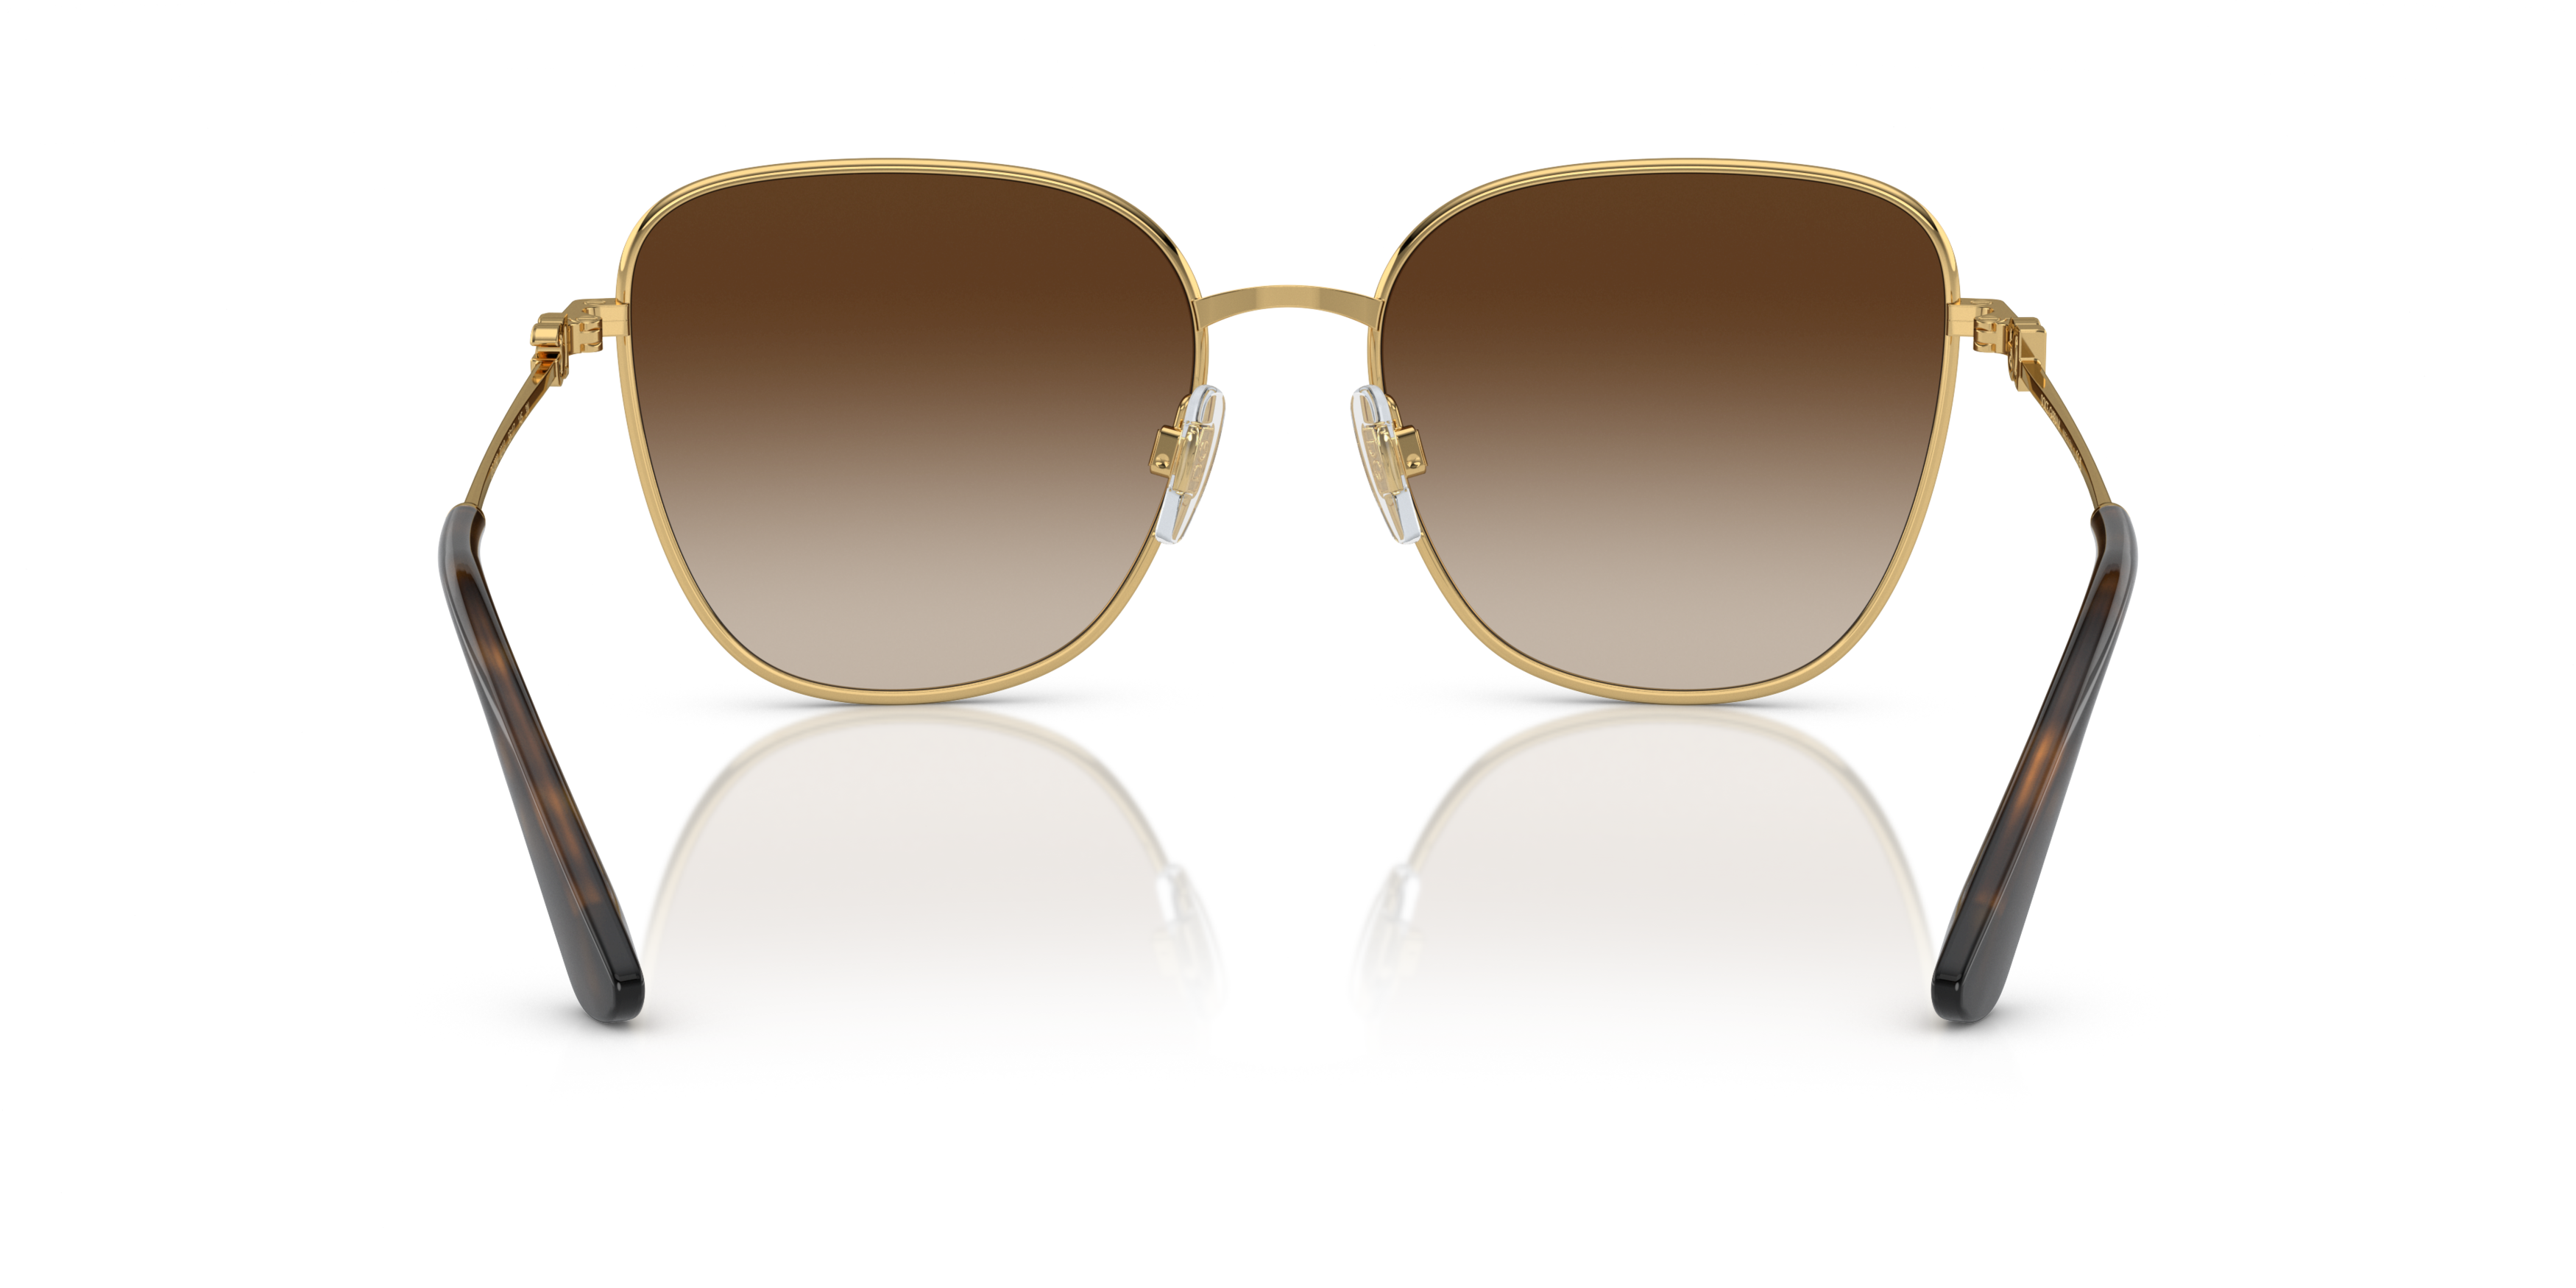 [products.image.detail02] Dolce and Gabbana 0DG2293 02/13